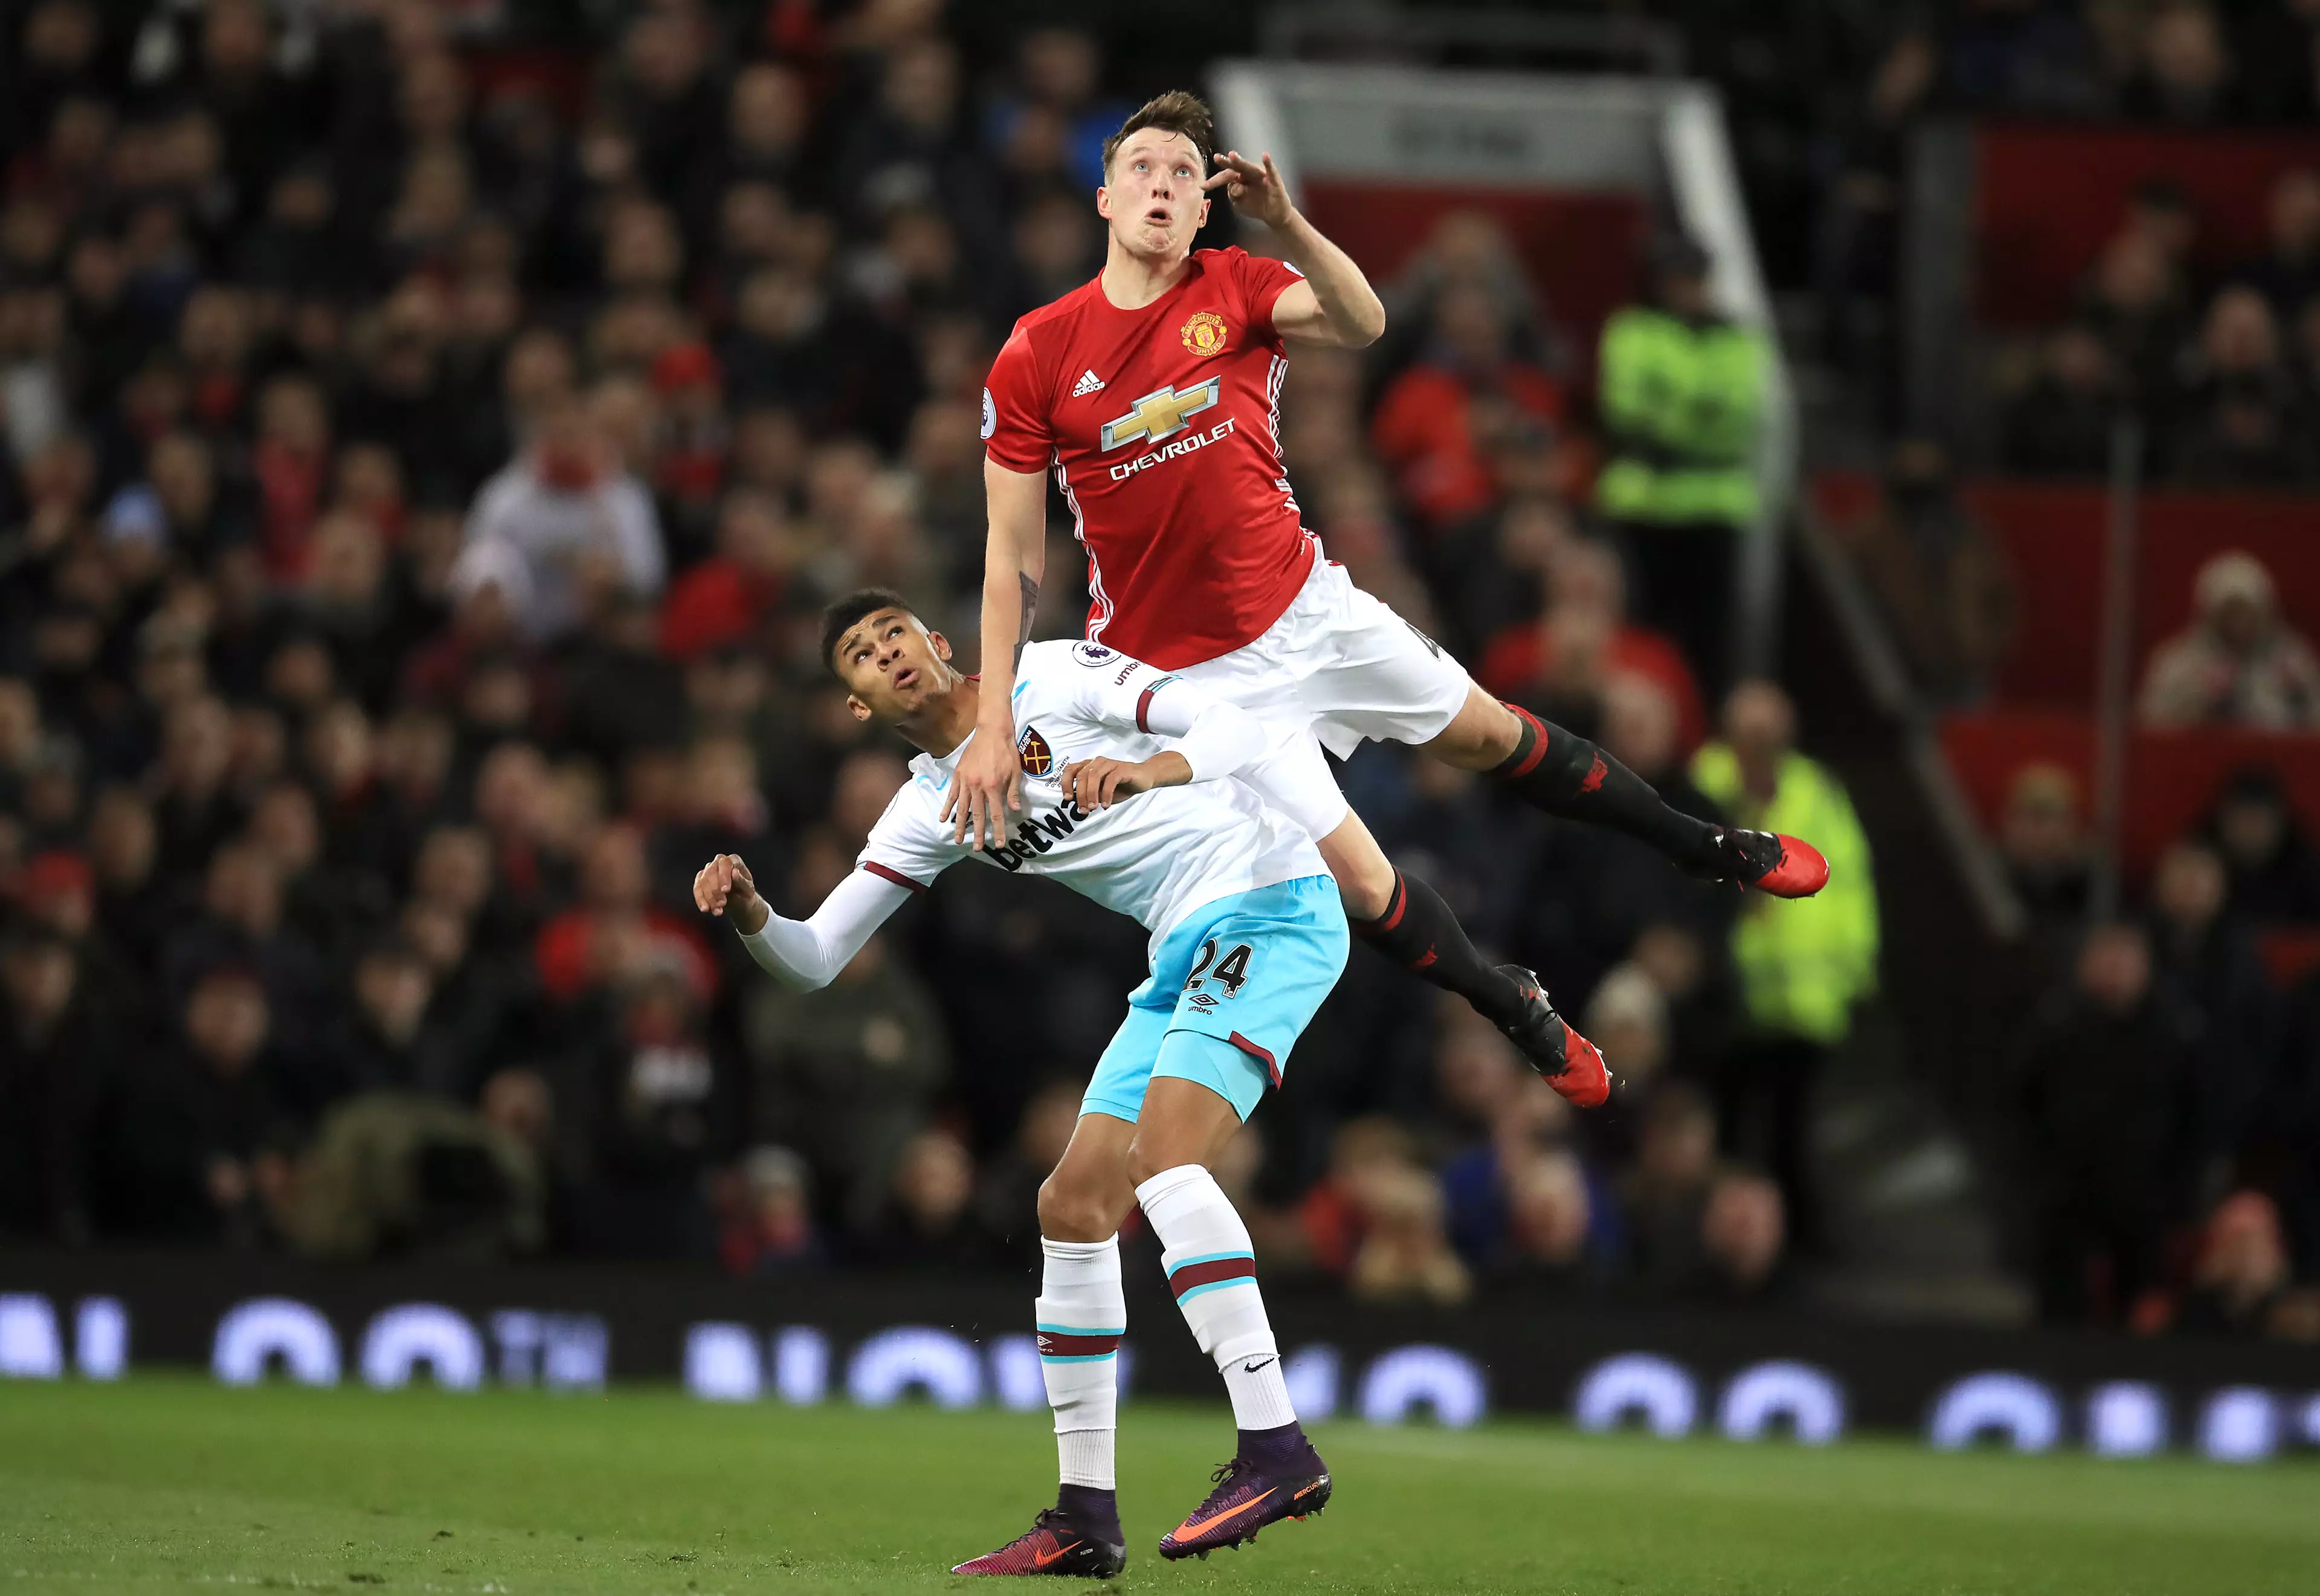 WATCH: Manchester United's Phil Jones Produces A Pass Like No Other